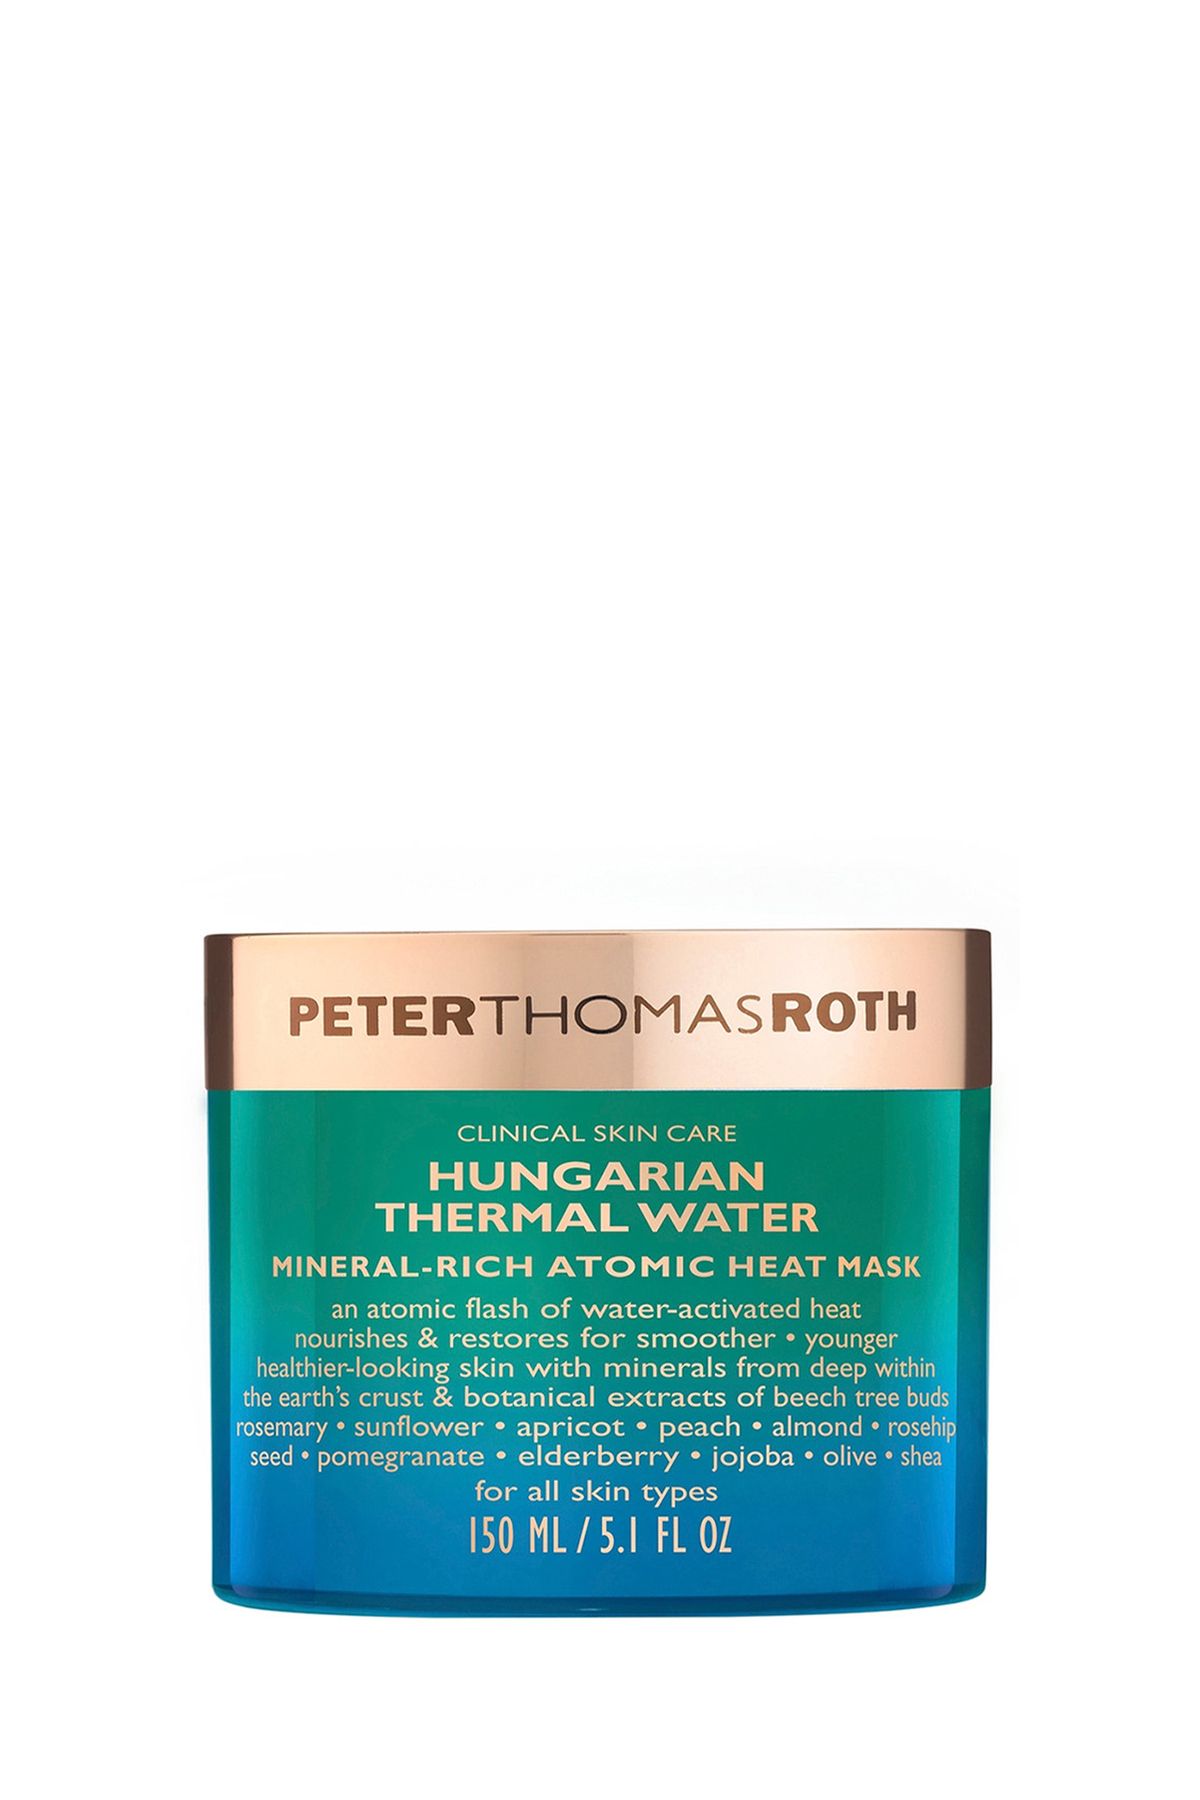 PETER THOMAS ROTH Hungarian Thermal Water Mineral-rich Atomic Heat Mask - 150 ml